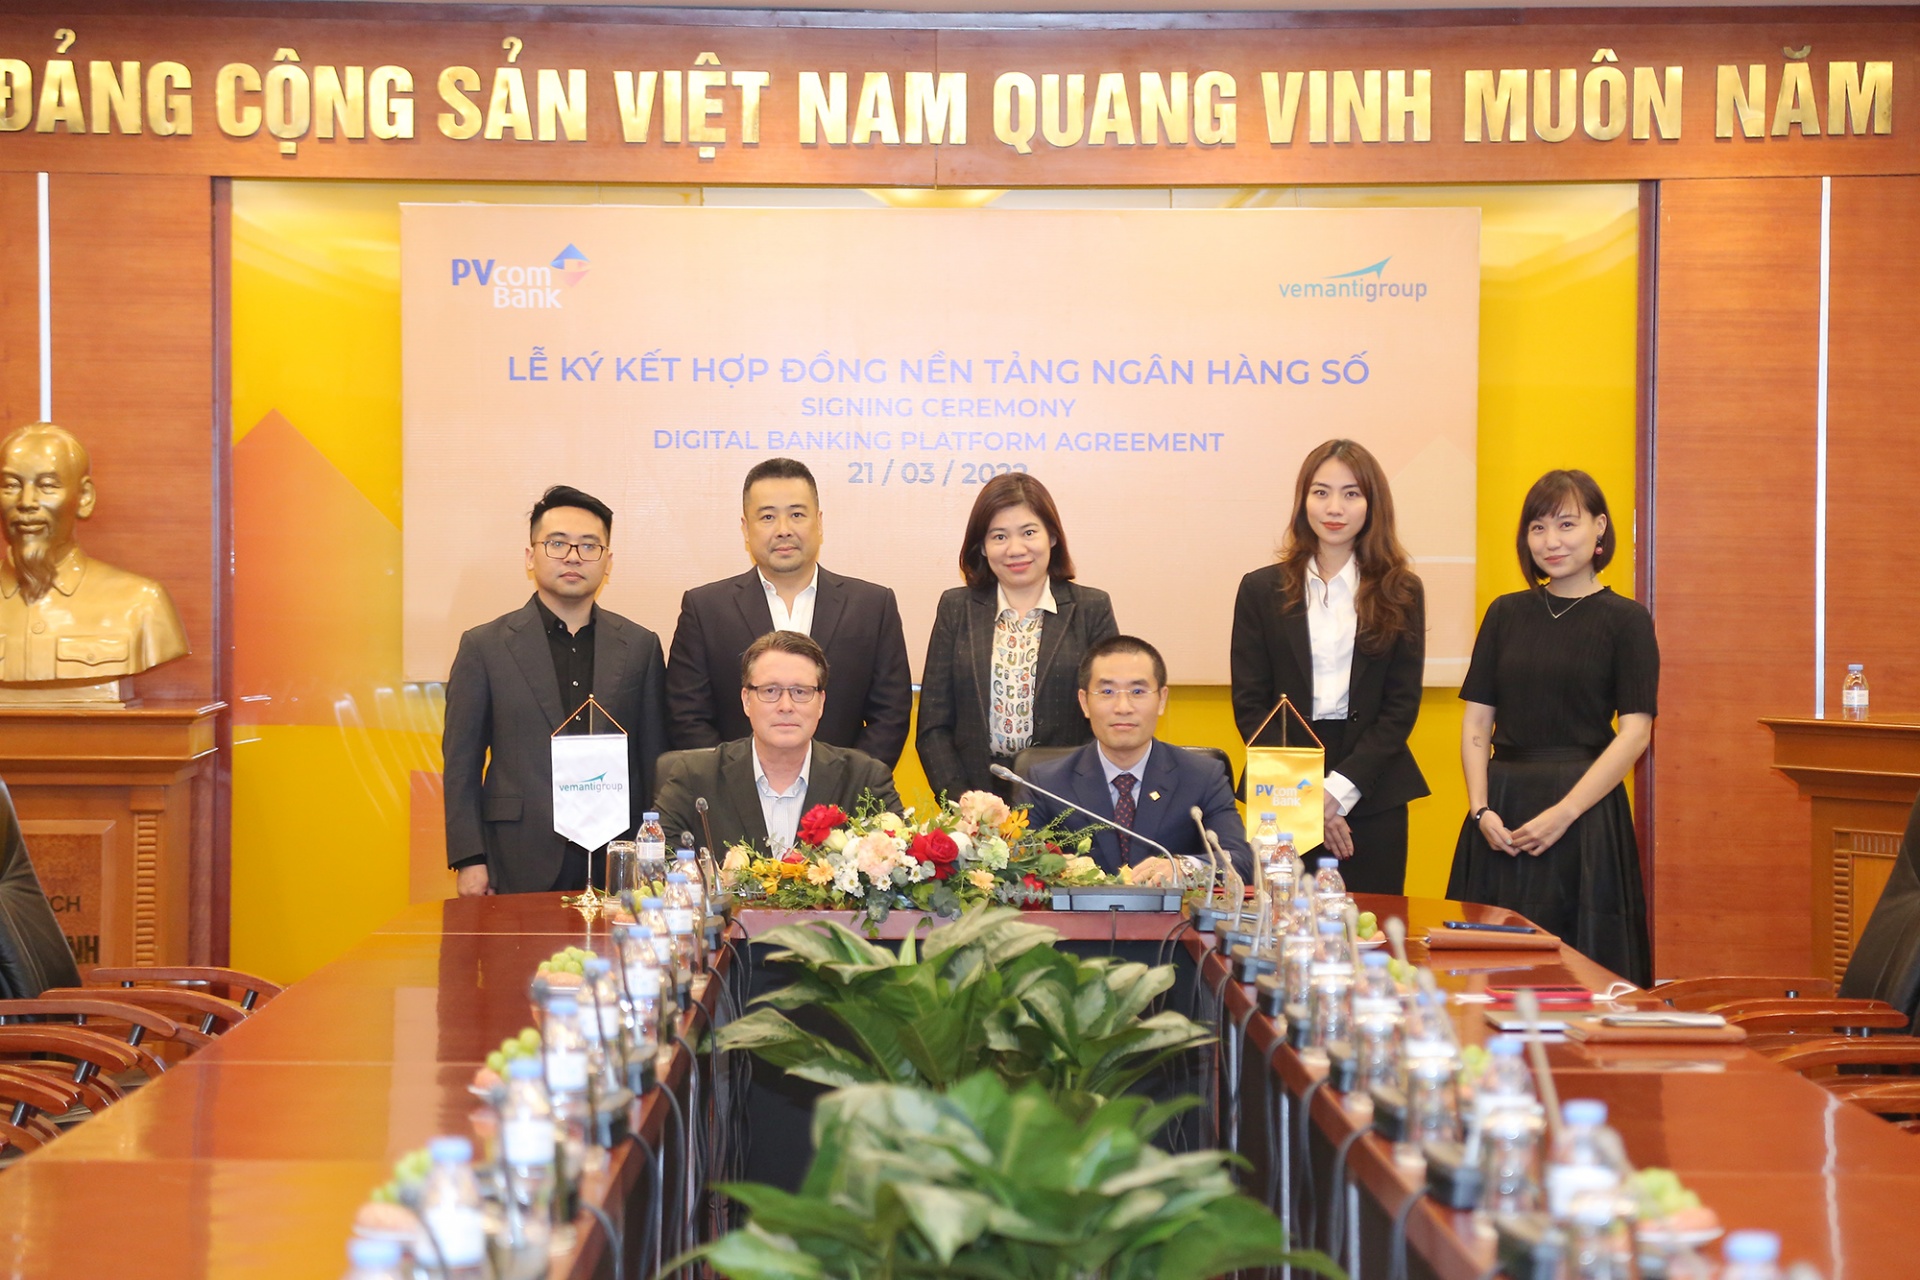 PVcomBank and Vemanti Group sign inclusive digital banking cooperation agreement